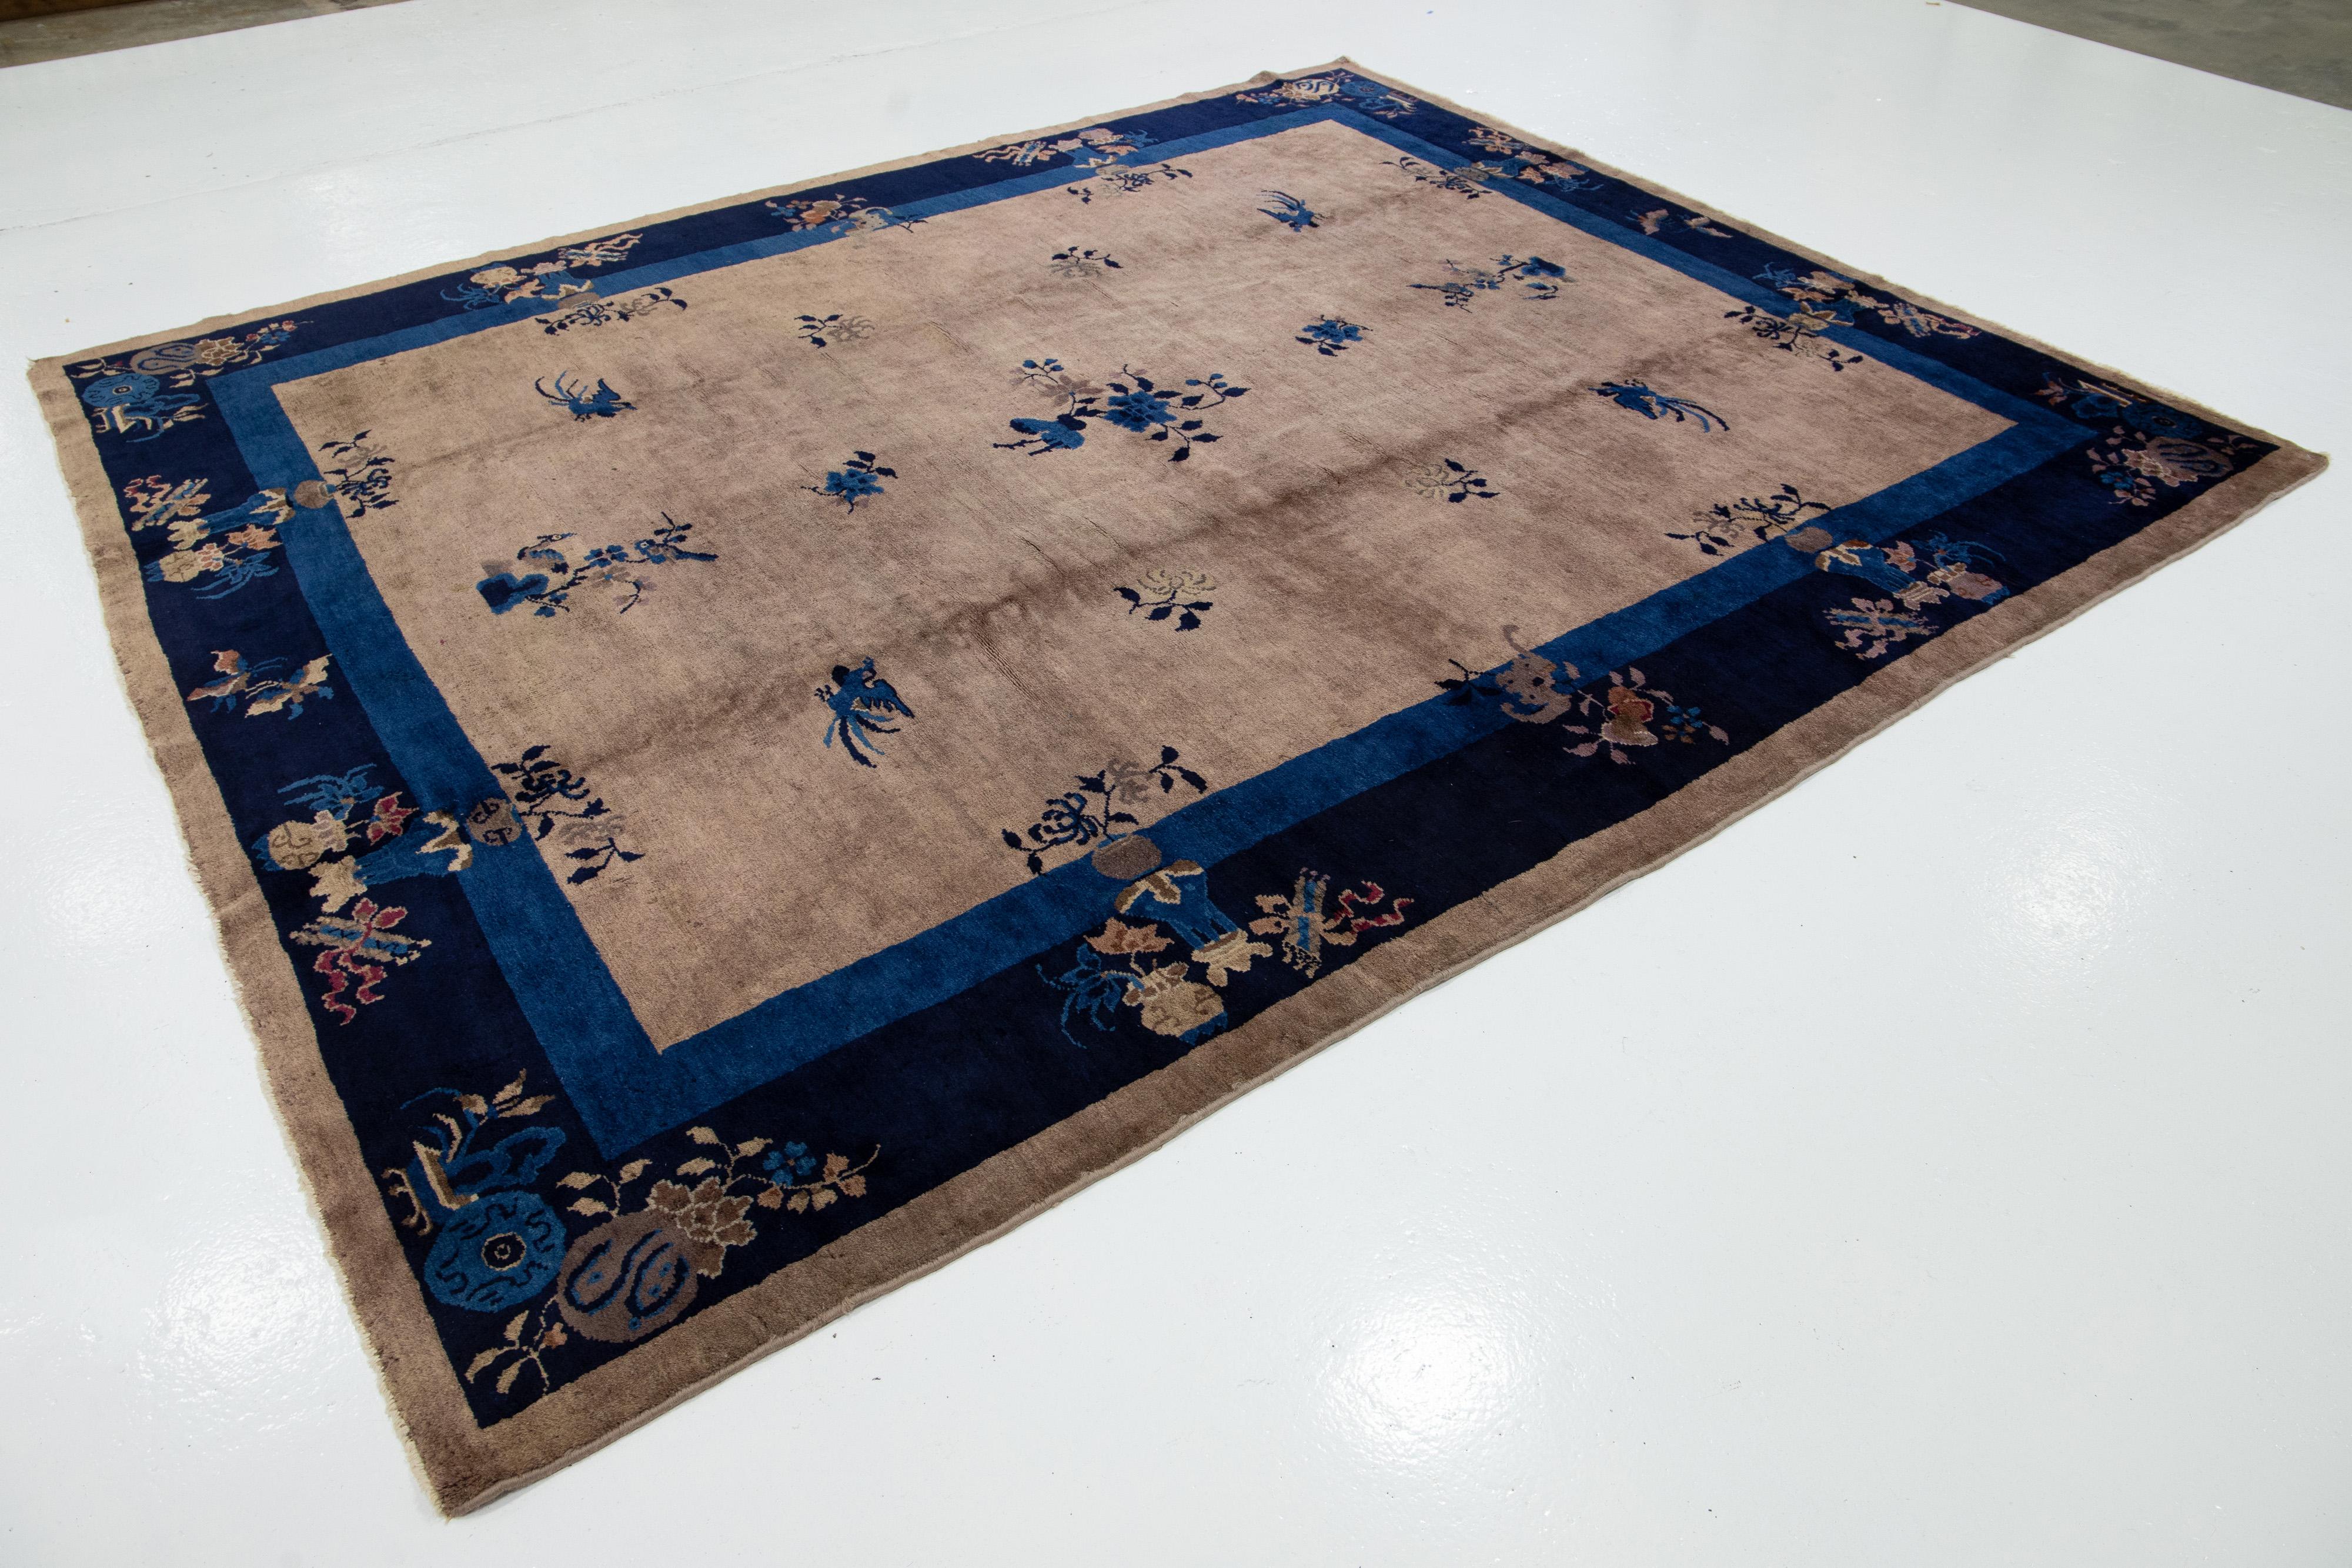 20th Century Art Deco Chinese Floral Designed Wool Rug Antique Handmade In light Brown For Sale